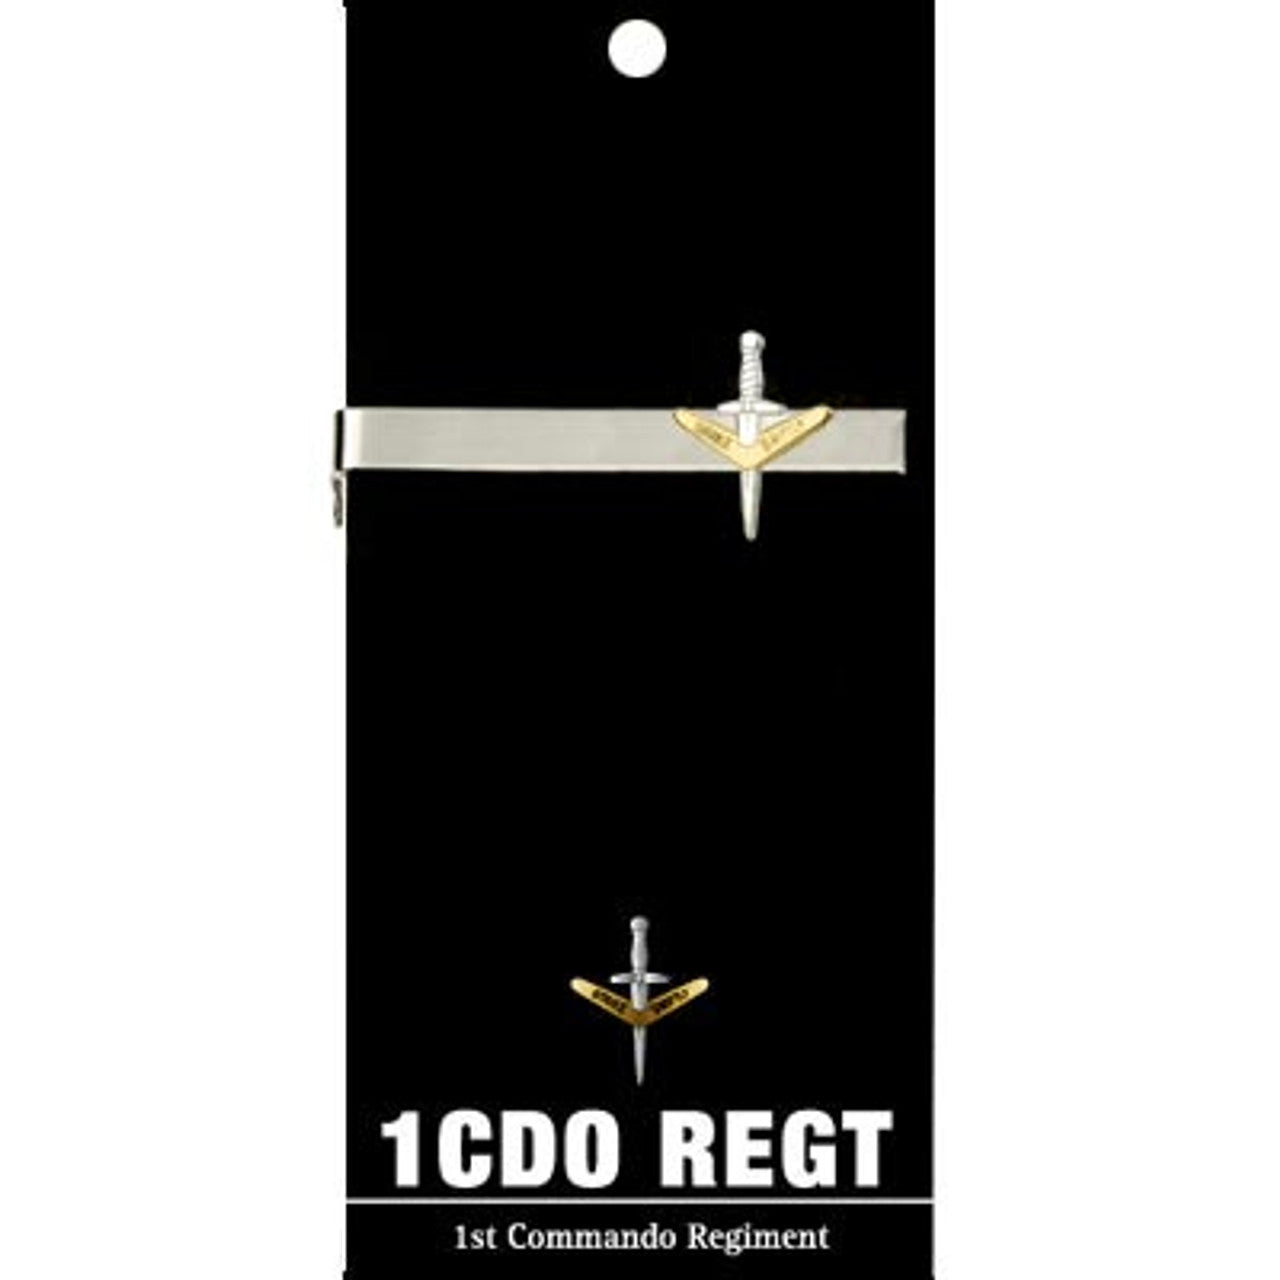 Add a touch of elegance to your look with the 1st Commando Regiment (1 CDO REGT) 20mm enamel tie bar! Crafted with gold-plated material, this gorgeous tie bar is perfect for any work or formal occasion. www.defenceqstore.com.au